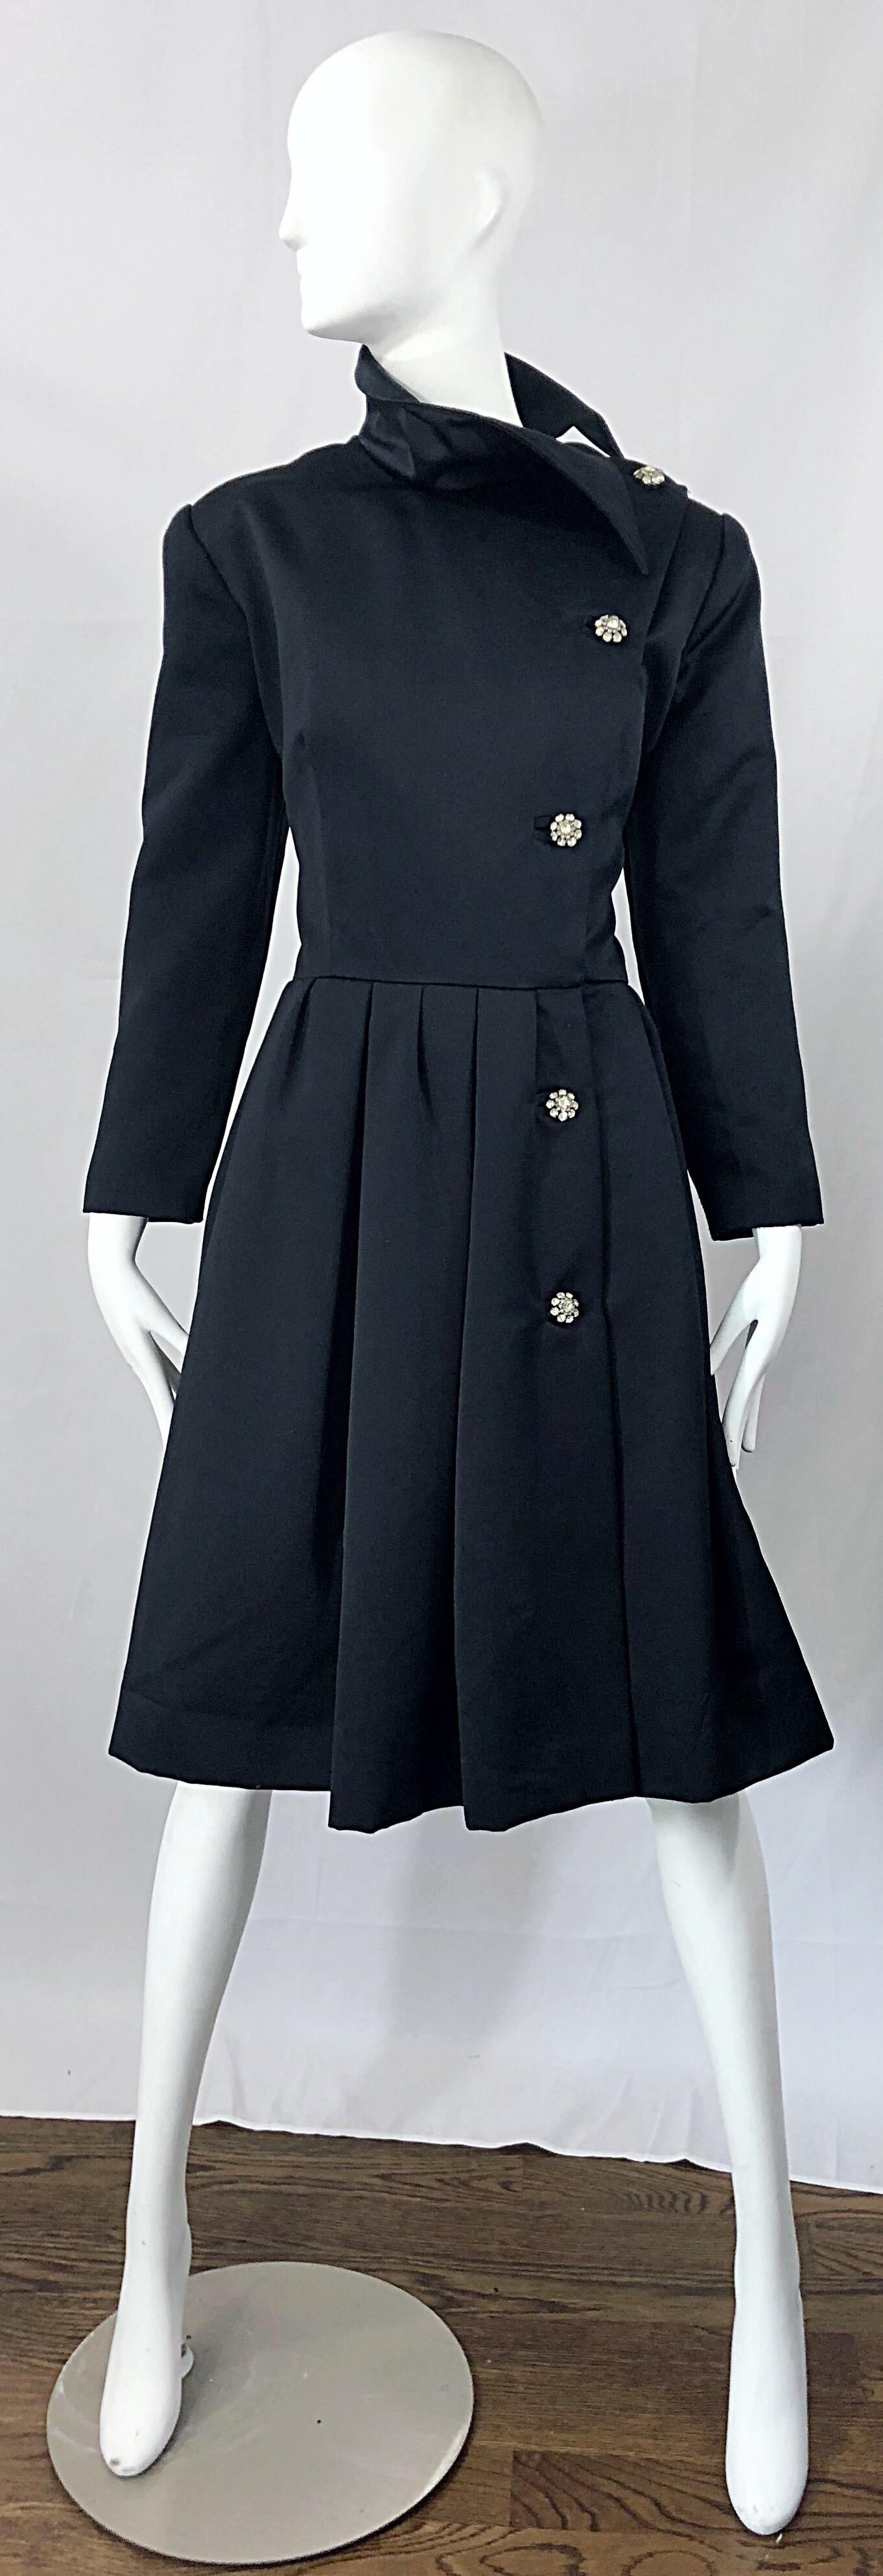 Beautiful vintage VICTOR COSTA for SAKS FIFTH AVENUE black cocktail dress! Features a fitted bodice, with a forgiving full skirt. Collar can be worn flipped up or down. POCKETS at each side of the hips. Excellent craftsmanship, with lots of